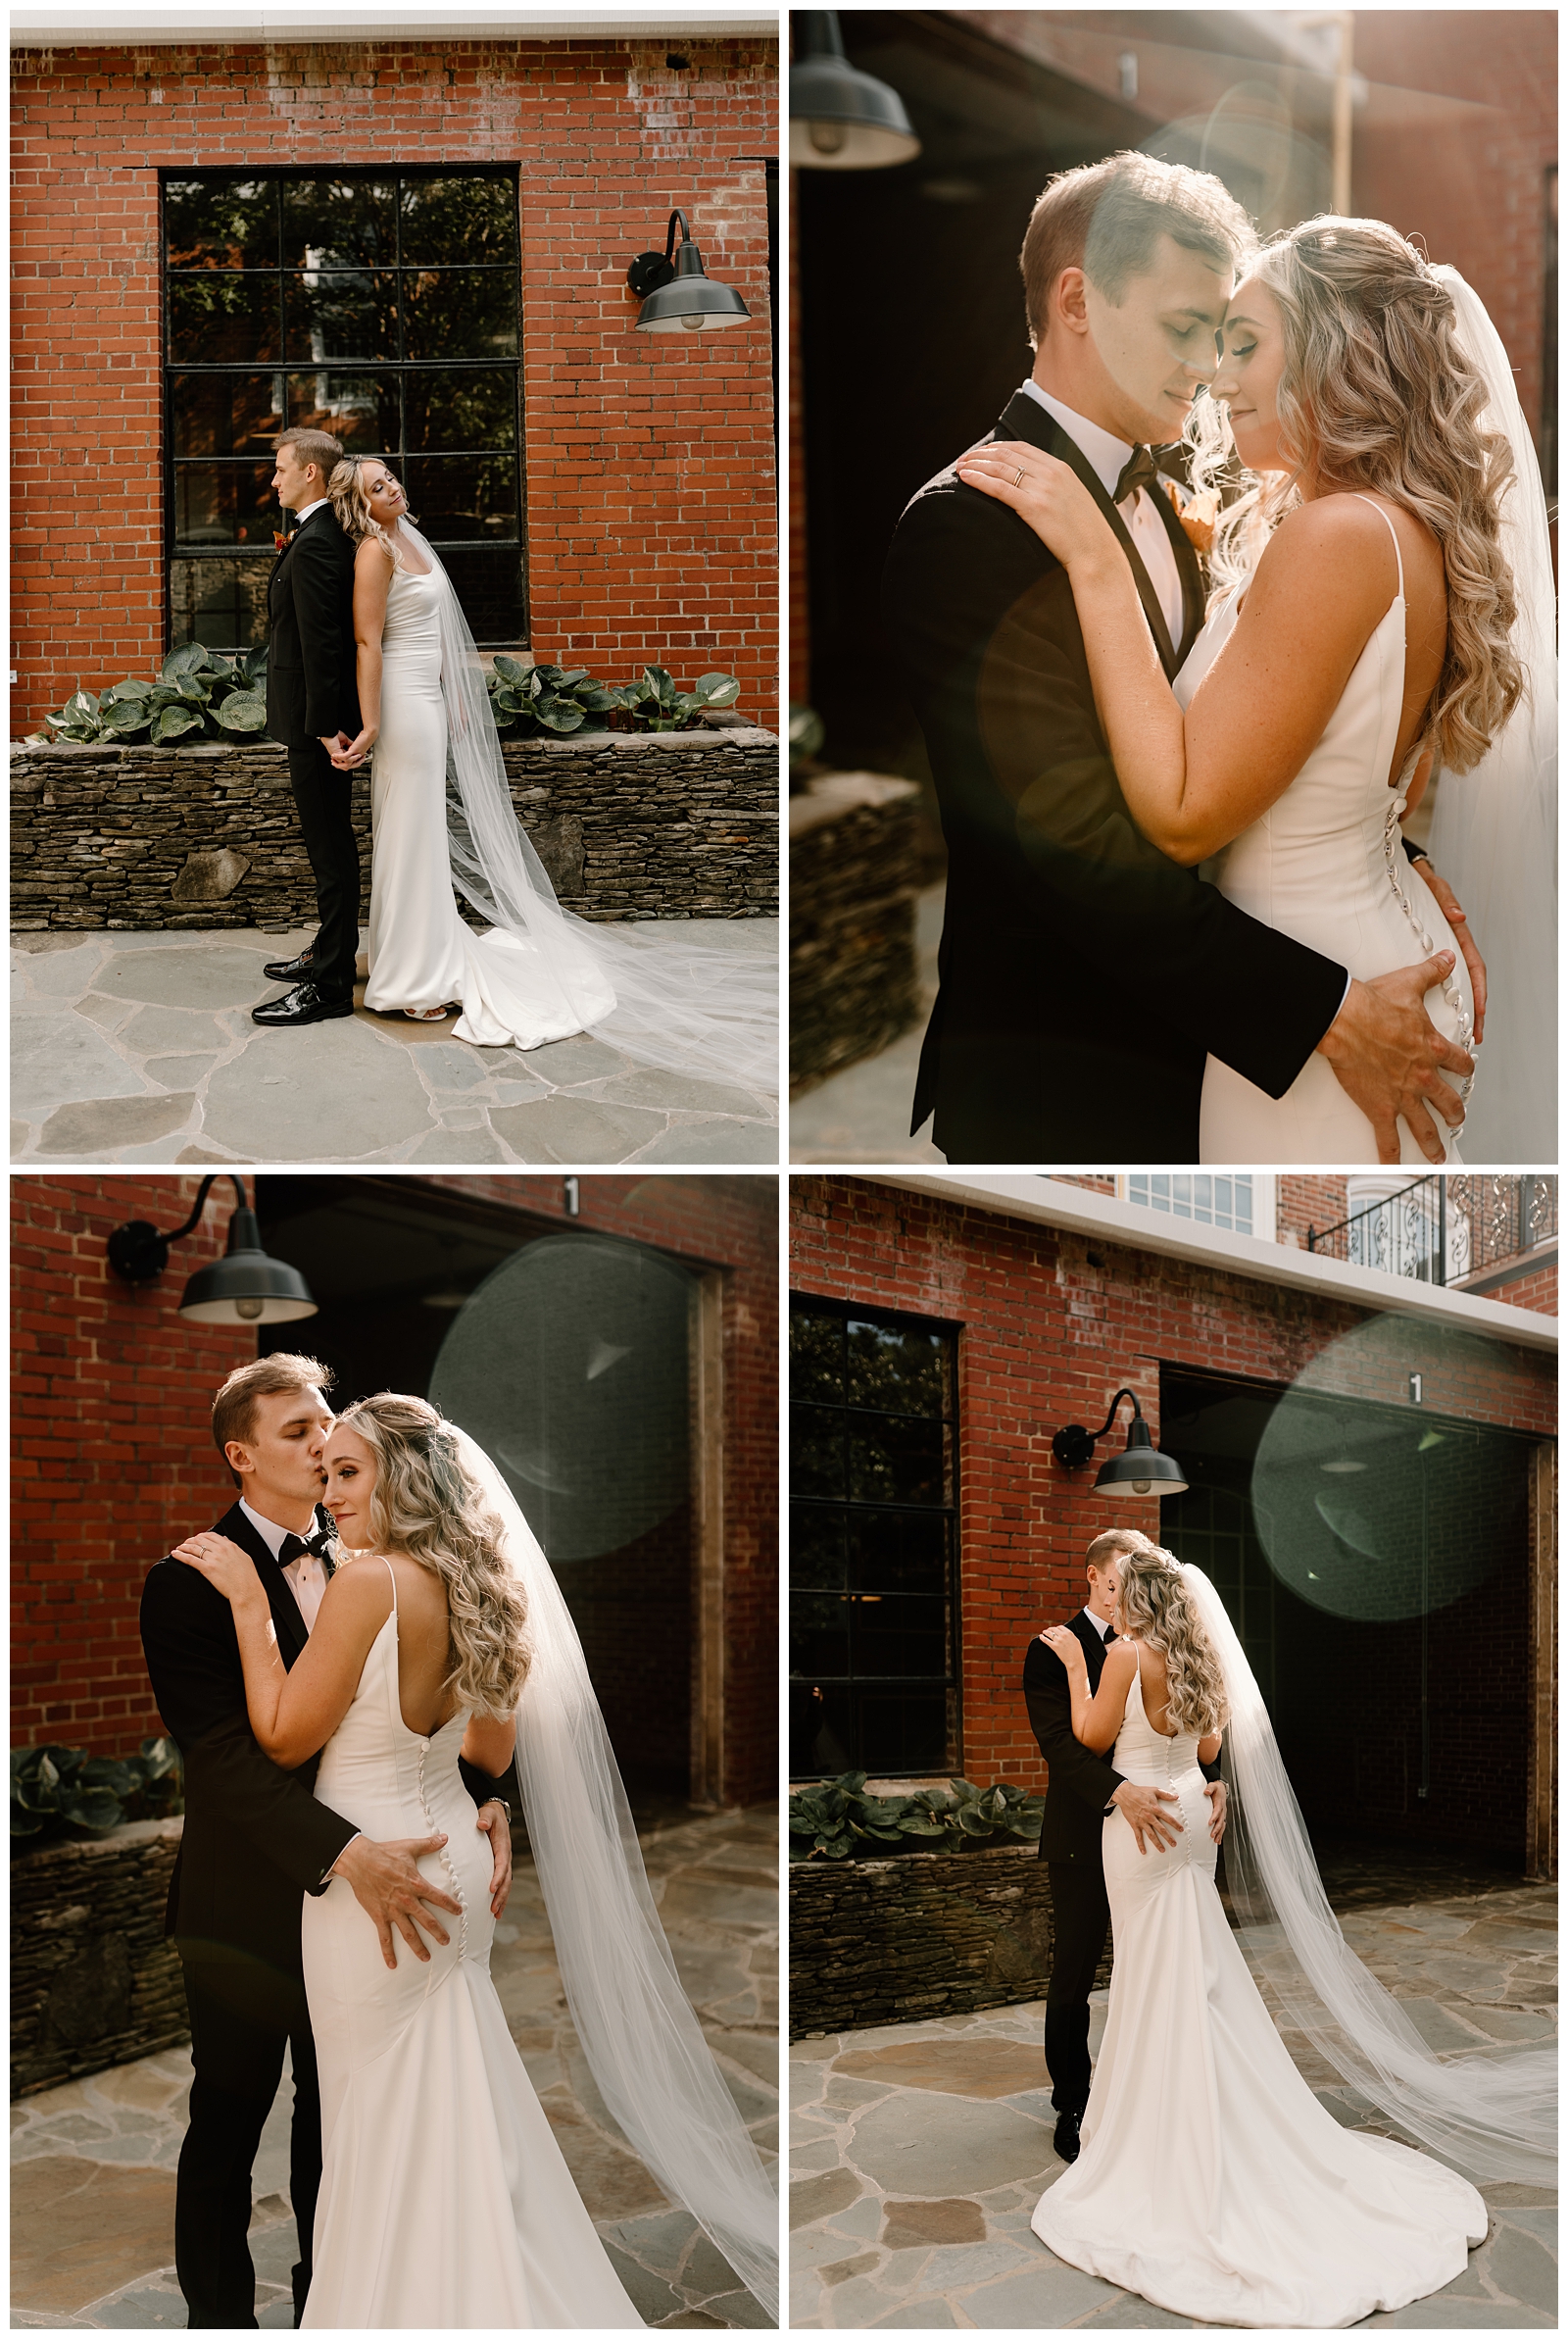 Modern industrial bride and groom photos at historical venue Revolution Mill in Greensboro, NC